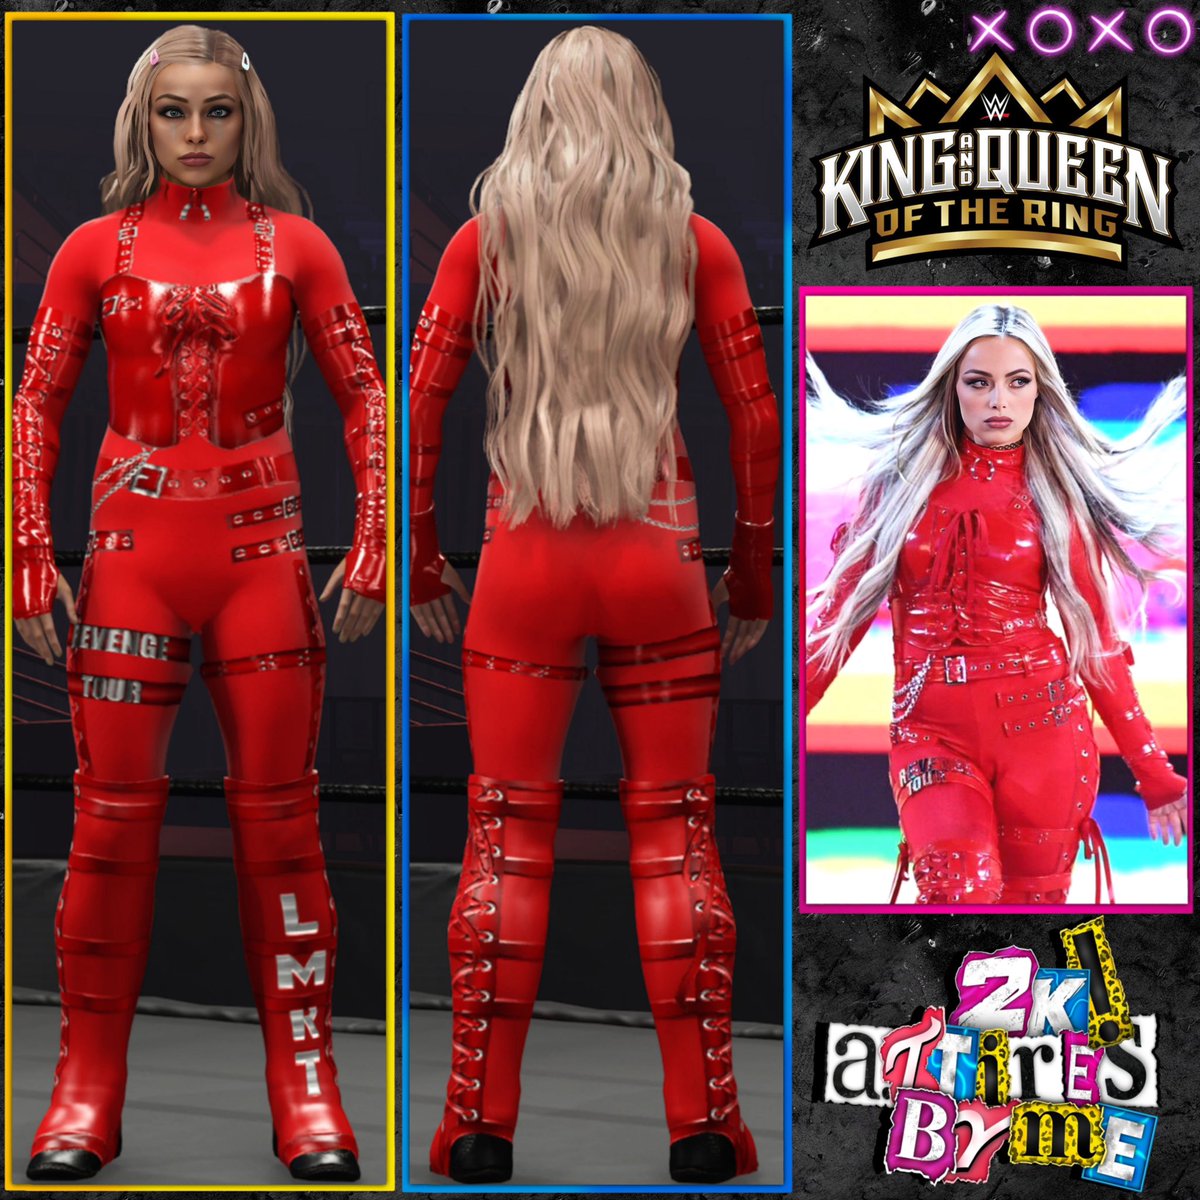 Superstar: @YaOnlyLivvOnce Gear: King and Queen of the ring’24 Hashtag: 2KBYME Cc: Yes dawls ♥️ Enjoy!!